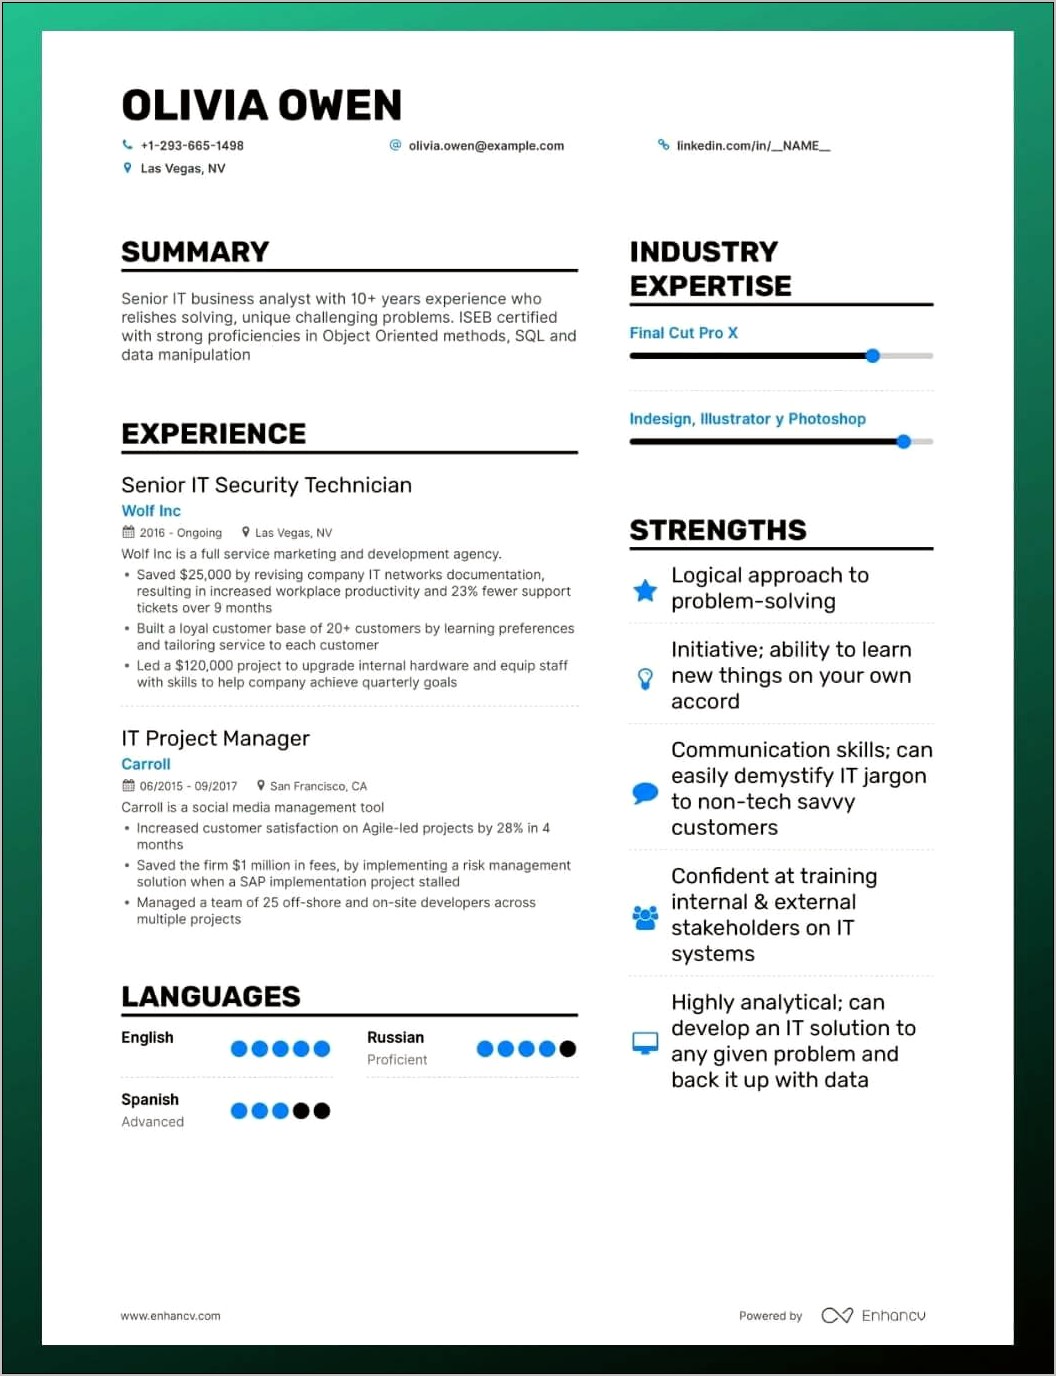 Examples Of Proficiencies Section On A Resume